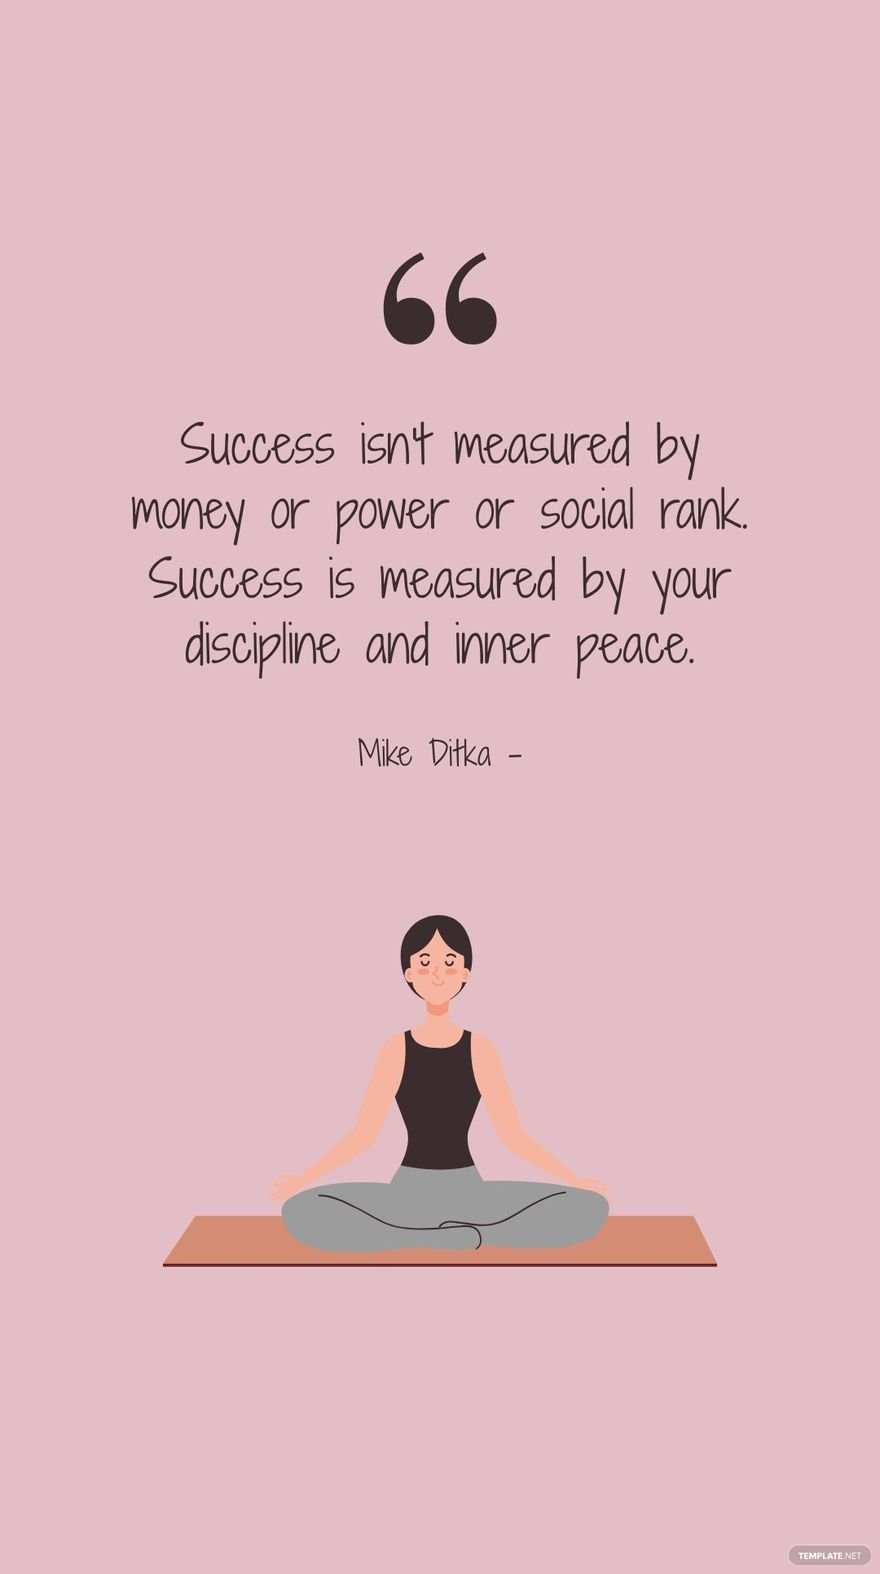 Mike Ditka - Success isn't measured by money or power or social rank. Success is measured by your discipline and inner peace.